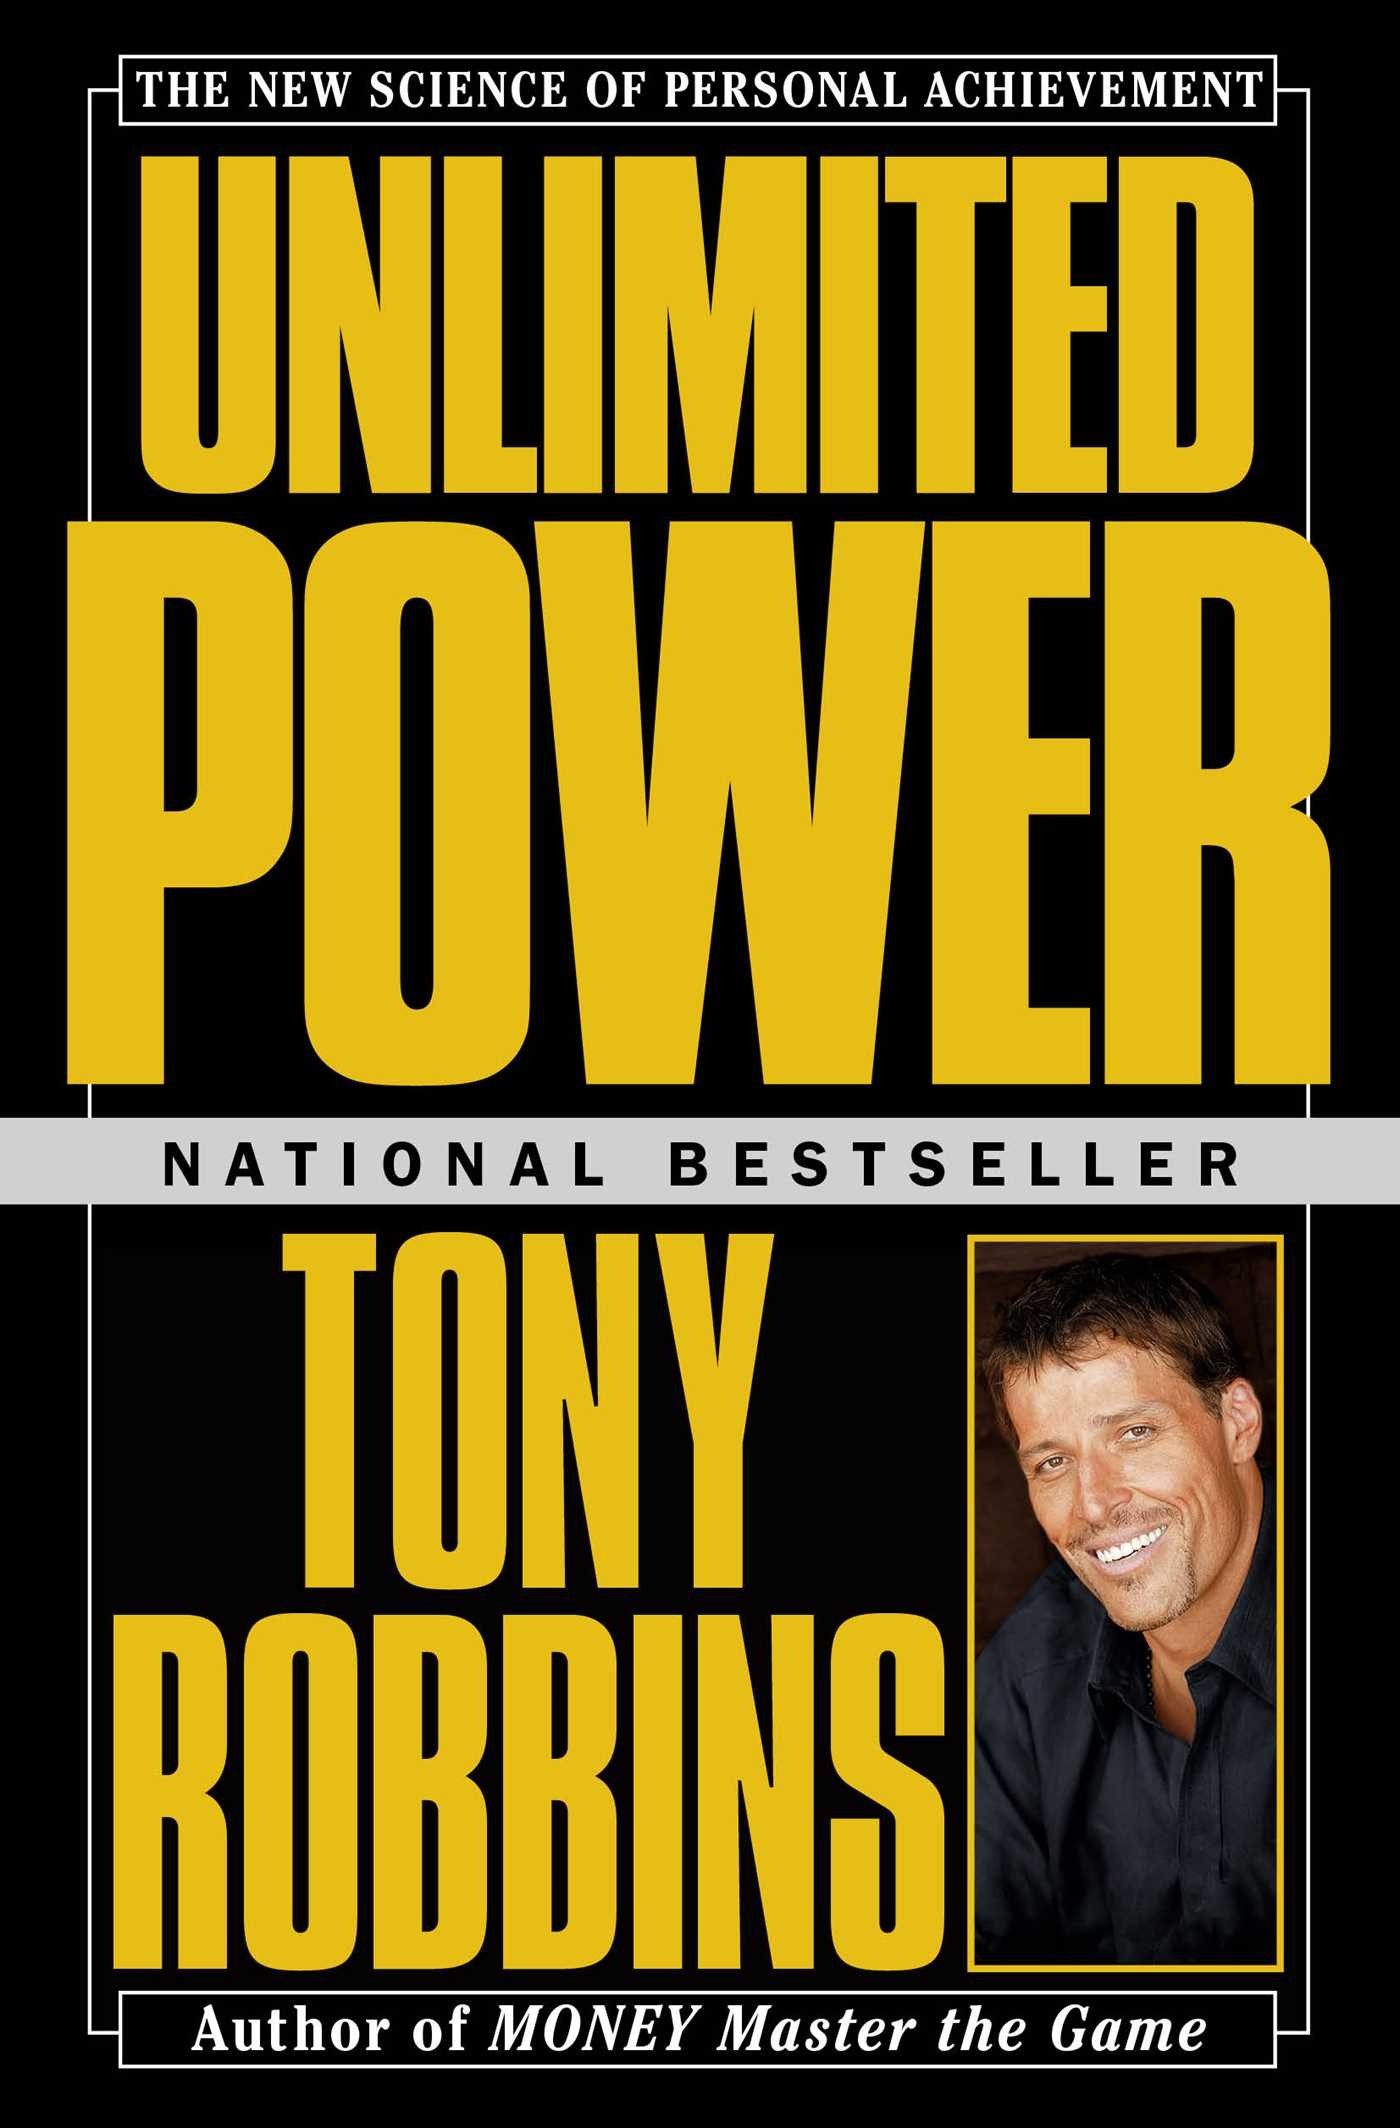 unlimited power anthony robbins pdf free download